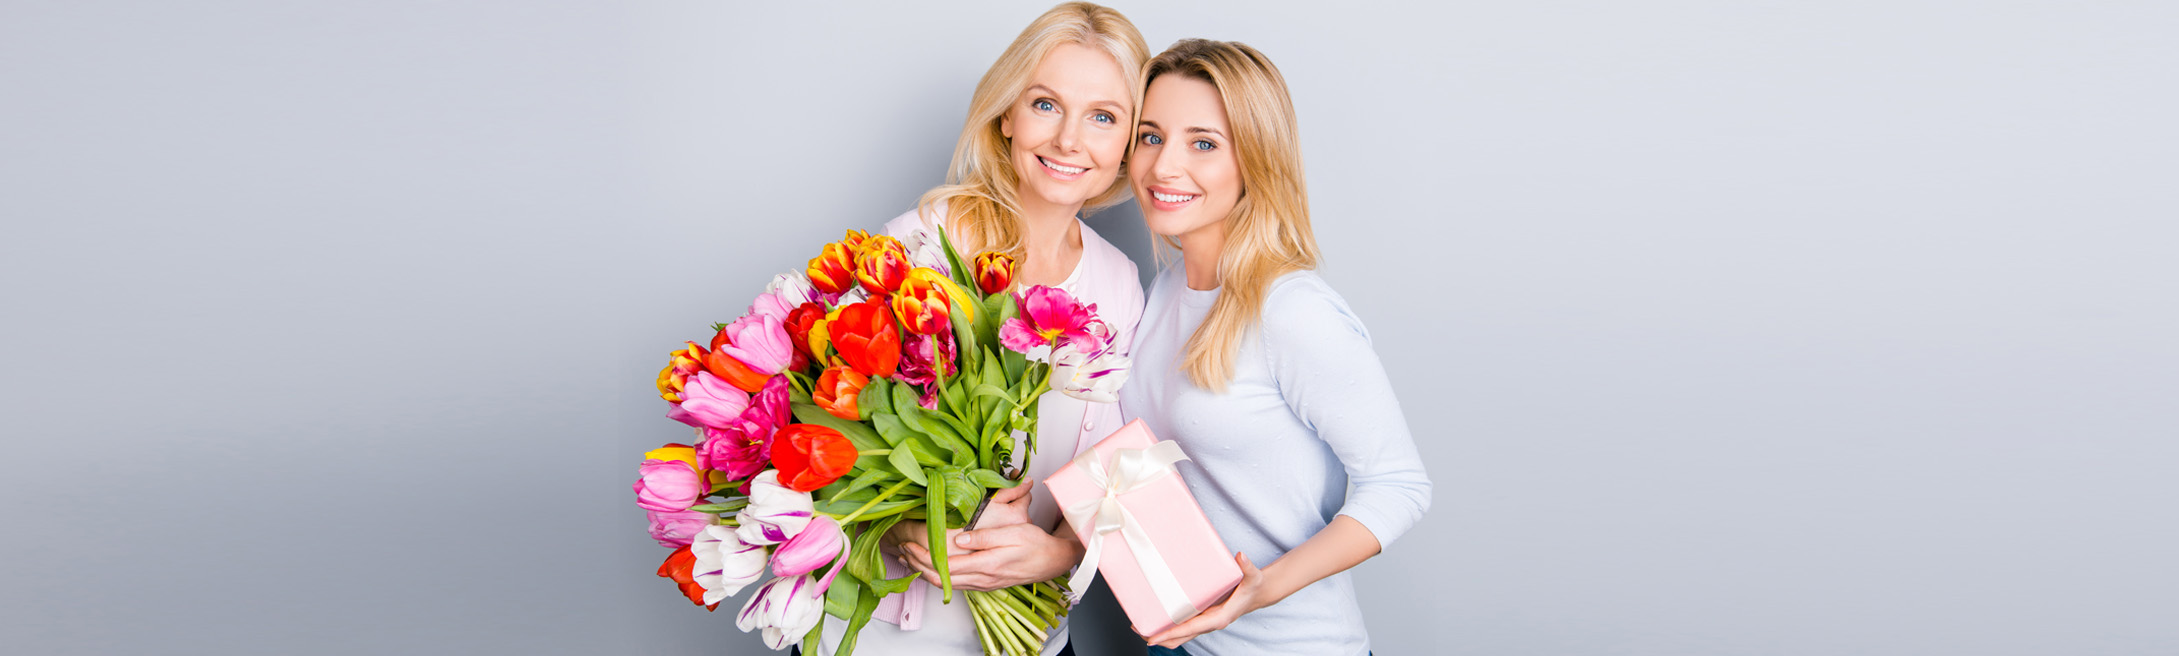 Our 5 Favorite Products for Mother’s Day